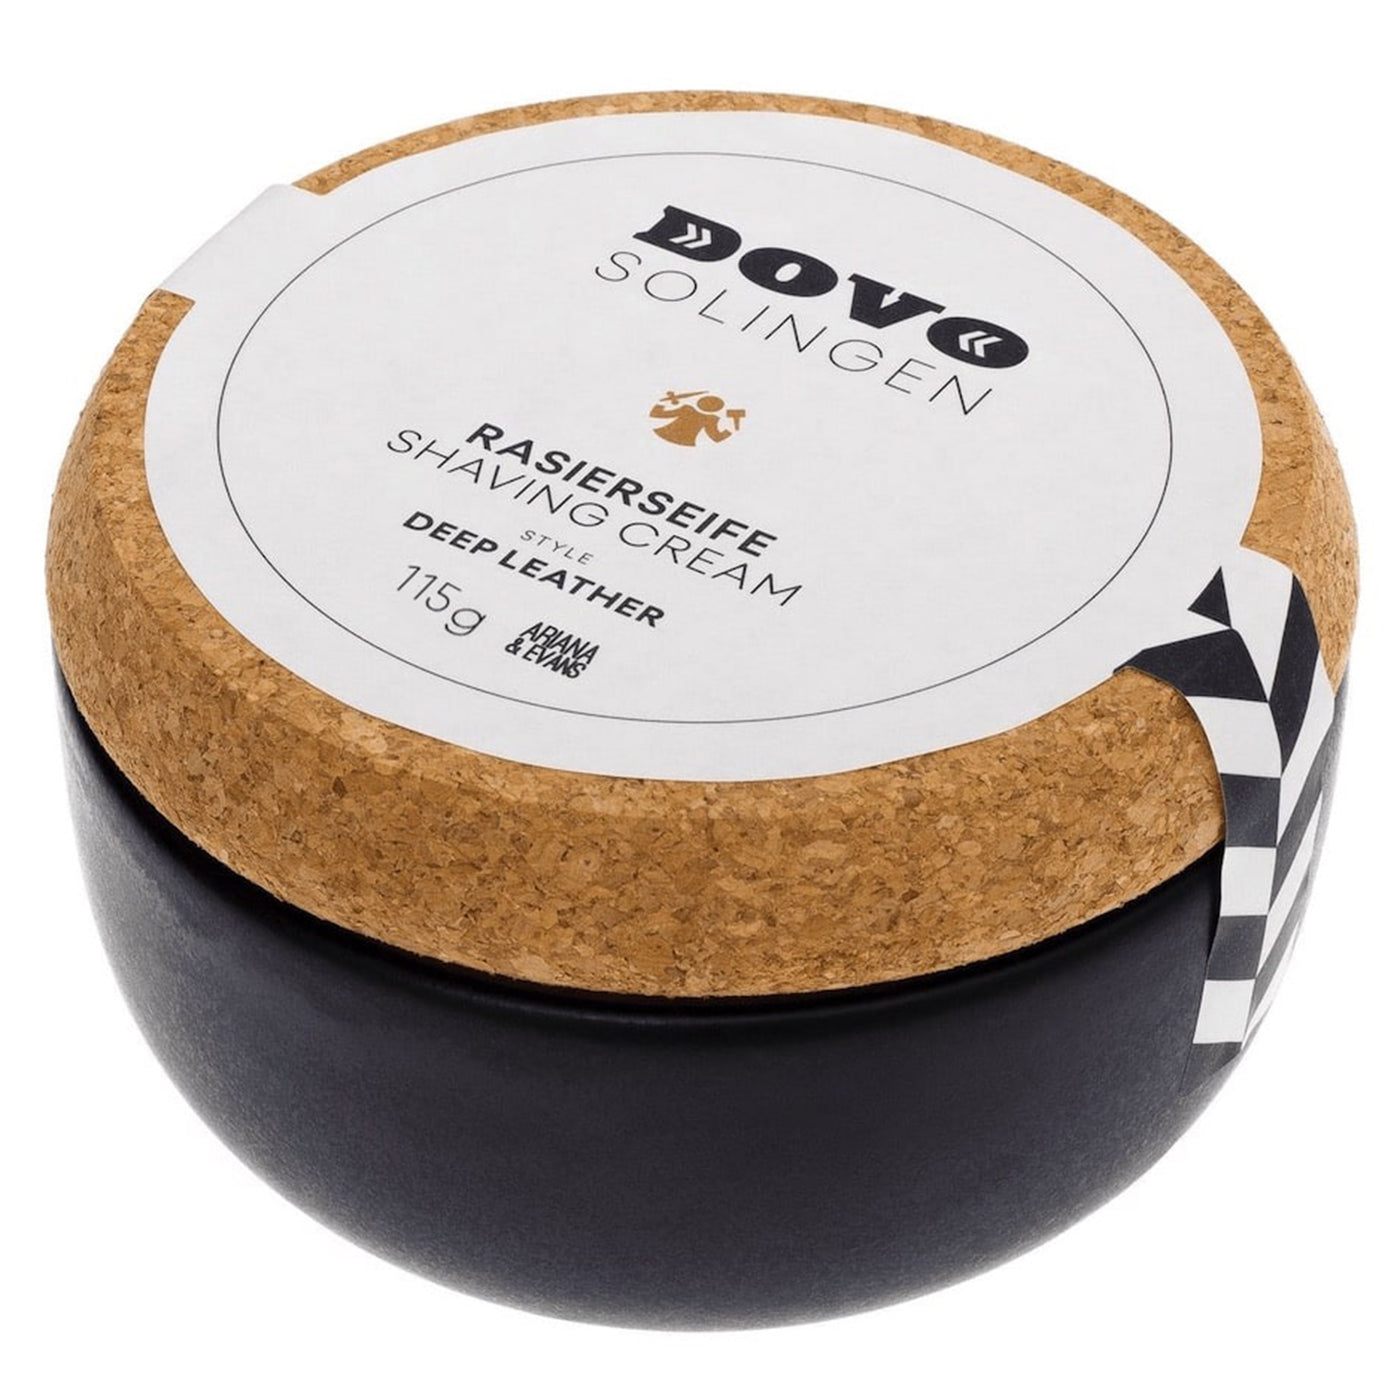  Dovo Deep Leather Shaving Soap by Dovo sold by Naked Armor Razors